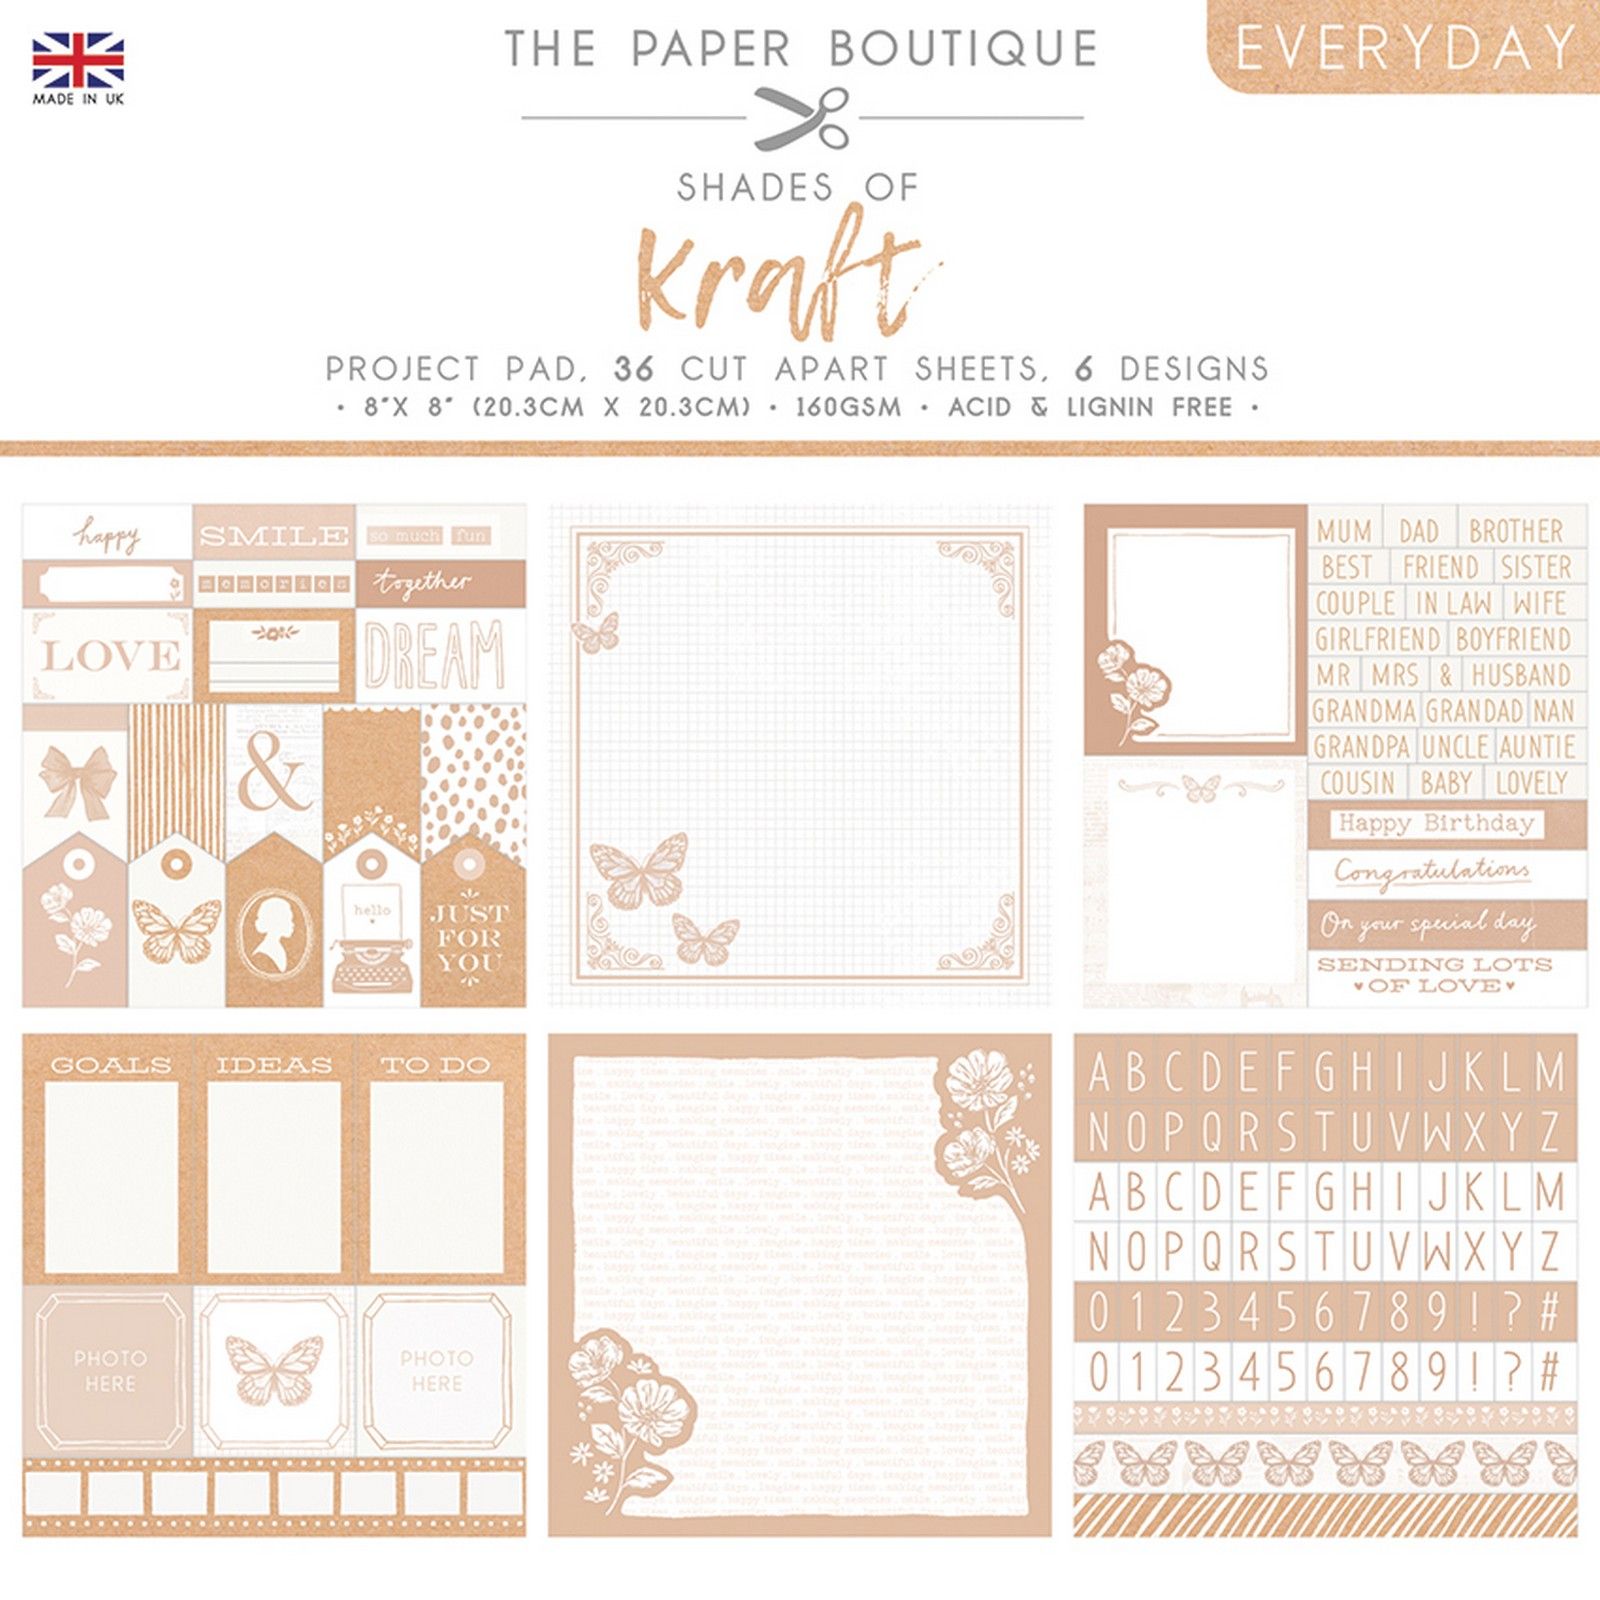 The Paper Boutique • Everyday shades of Kraft project pad